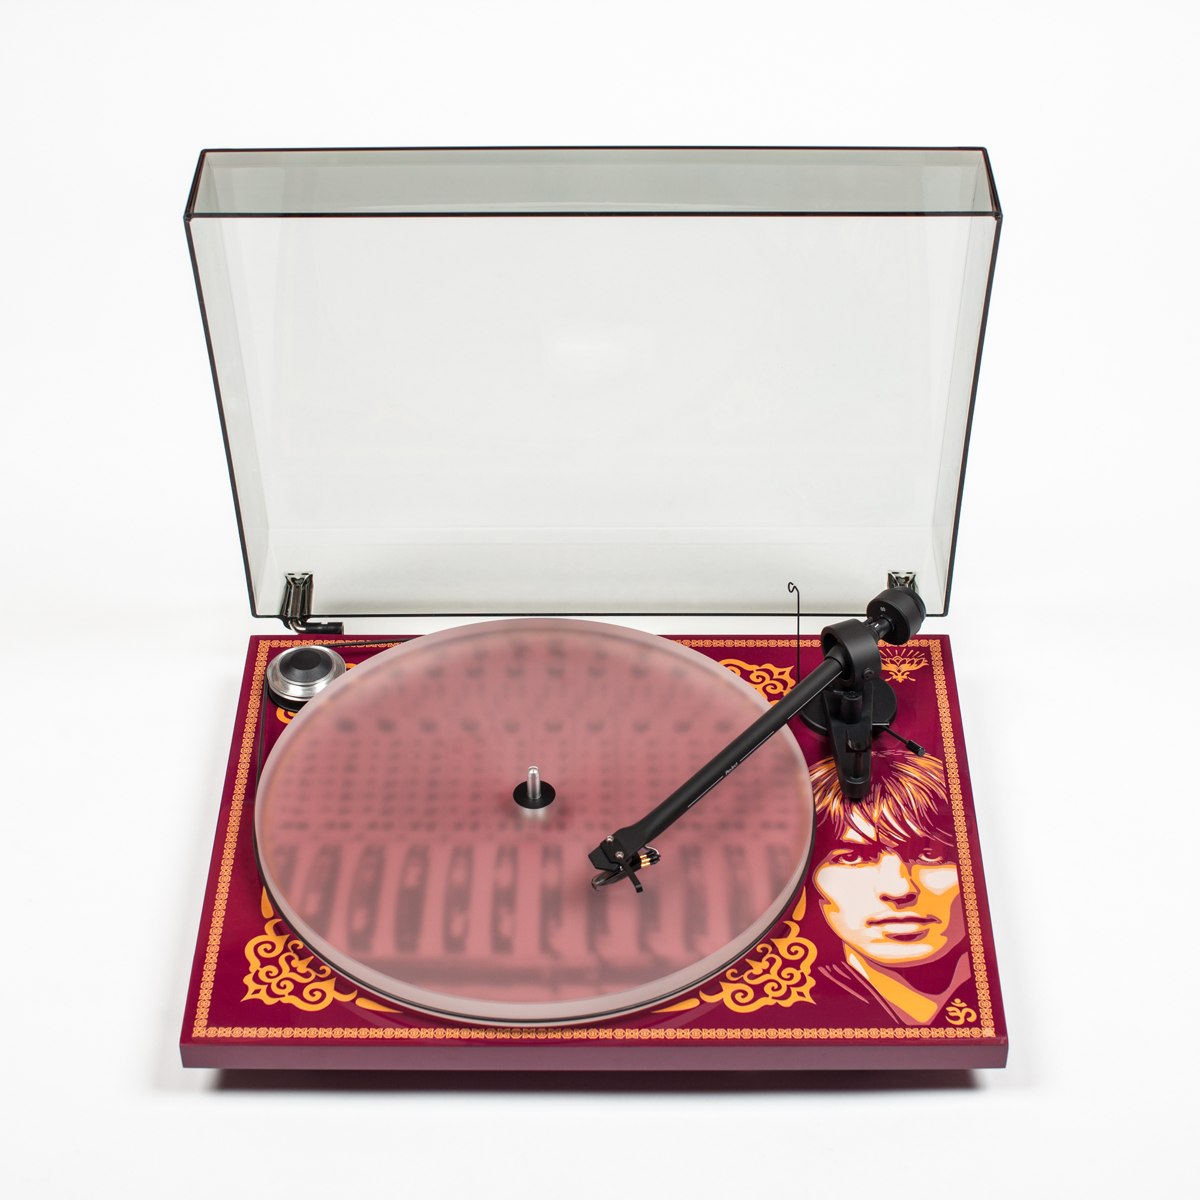 George Harrison Pro-Ject Turntable Product Shot_WEB